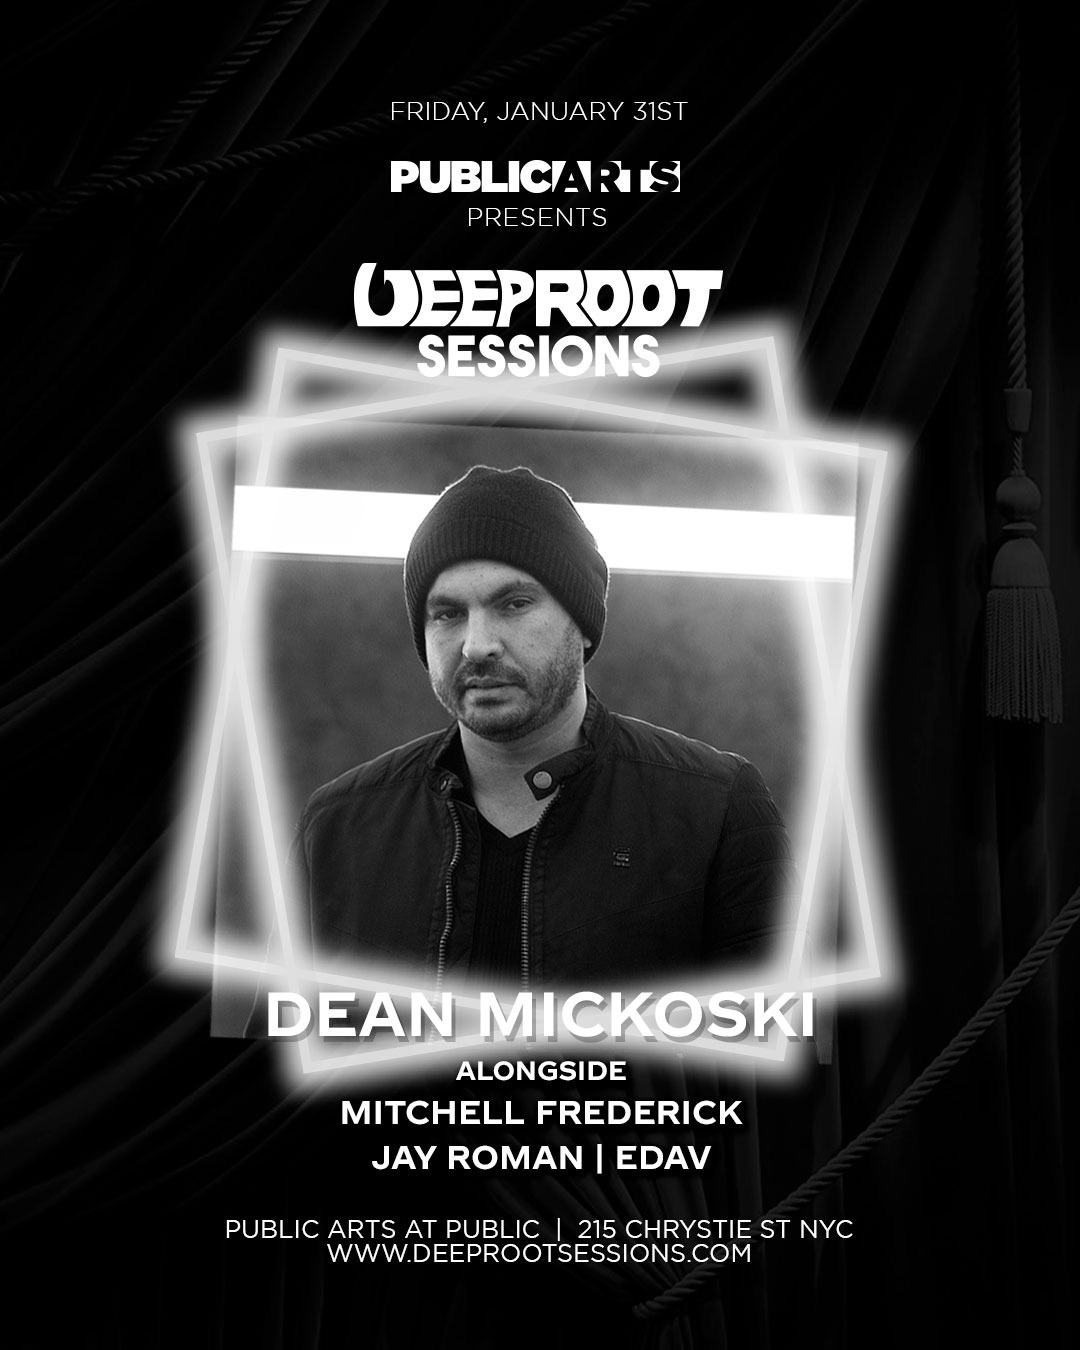 Public Arts ft. Special Set by Dean Mickoski